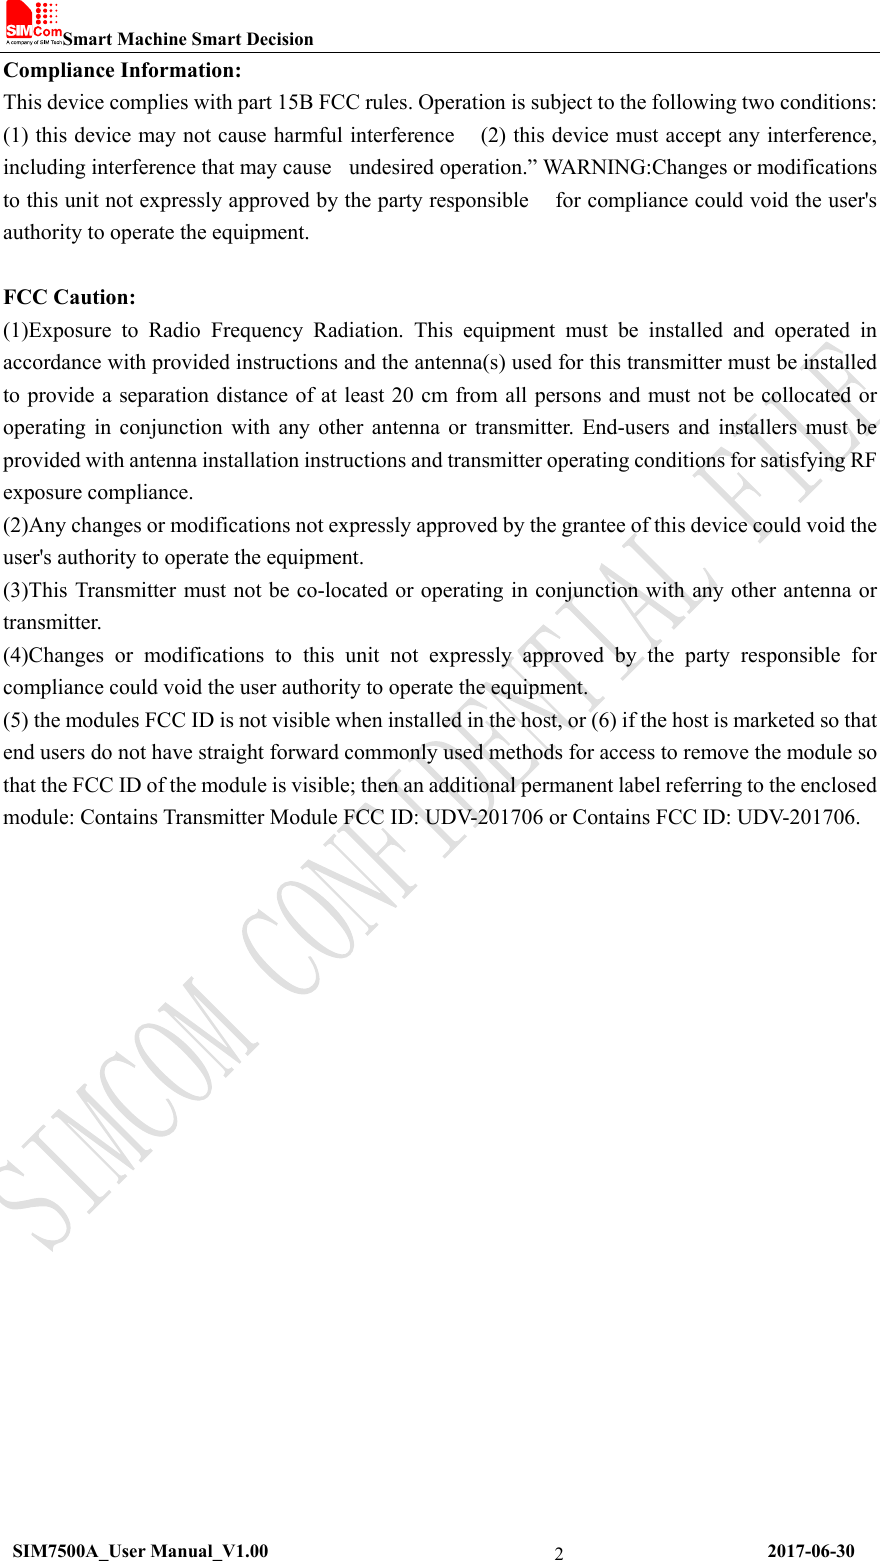 Smart Machine Smart Decision   SIM7500A_User Manual_V1.00                                                      2017-06-30 2Compliance Information: This device complies with part 15B FCC rules. Operation is subject to the following two conditions:     (1) this device may not cause harmful interference   (2) this device must accept any interference, including interference that may cause    undesired operation.” WARNING:Changes or modifications to this unit not expressly approved by the party responsible      for compliance could void the user&apos;s authority to operate the equipment.    FCC Caution:   (1)Exposure  to  Radio  Frequency  Radiation.  This  equipment  must  be  installed  and  operated  in accordance with provided instructions and the antenna(s) used for this transmitter must be installed to provide a separation distance of at least 20 cm from all persons and must not be collocated or operating  in  conjunction  with  any  other  antenna  or  transmitter.  End-users  and  installers  must be provided with antenna installation instructions and transmitter operating conditions for satisfying RF exposure compliance.   (2)Any changes or modifications not expressly approved by the grantee of this device could void the user&apos;s authority to operate the equipment.   (3)This Transmitter must not be co-located or operating in conjunction with any other antenna or transmitter.   (4)Changes  or  modifications  to  this  unit  not  expressly  approved  by  the  party  responsible  for compliance could void the user authority to operate the equipment.   (5) the modules FCC ID is not visible when installed in the host, or (6) if the host is marketed so that end users do not have straight forward commonly used methods for access to remove the module so that the FCC ID of the module is visible; then an additional permanent label referring to the enclosed module: Contains Transmitter Module FCC ID: UDV-201706 or Contains FCC ID: UDV-201706.     